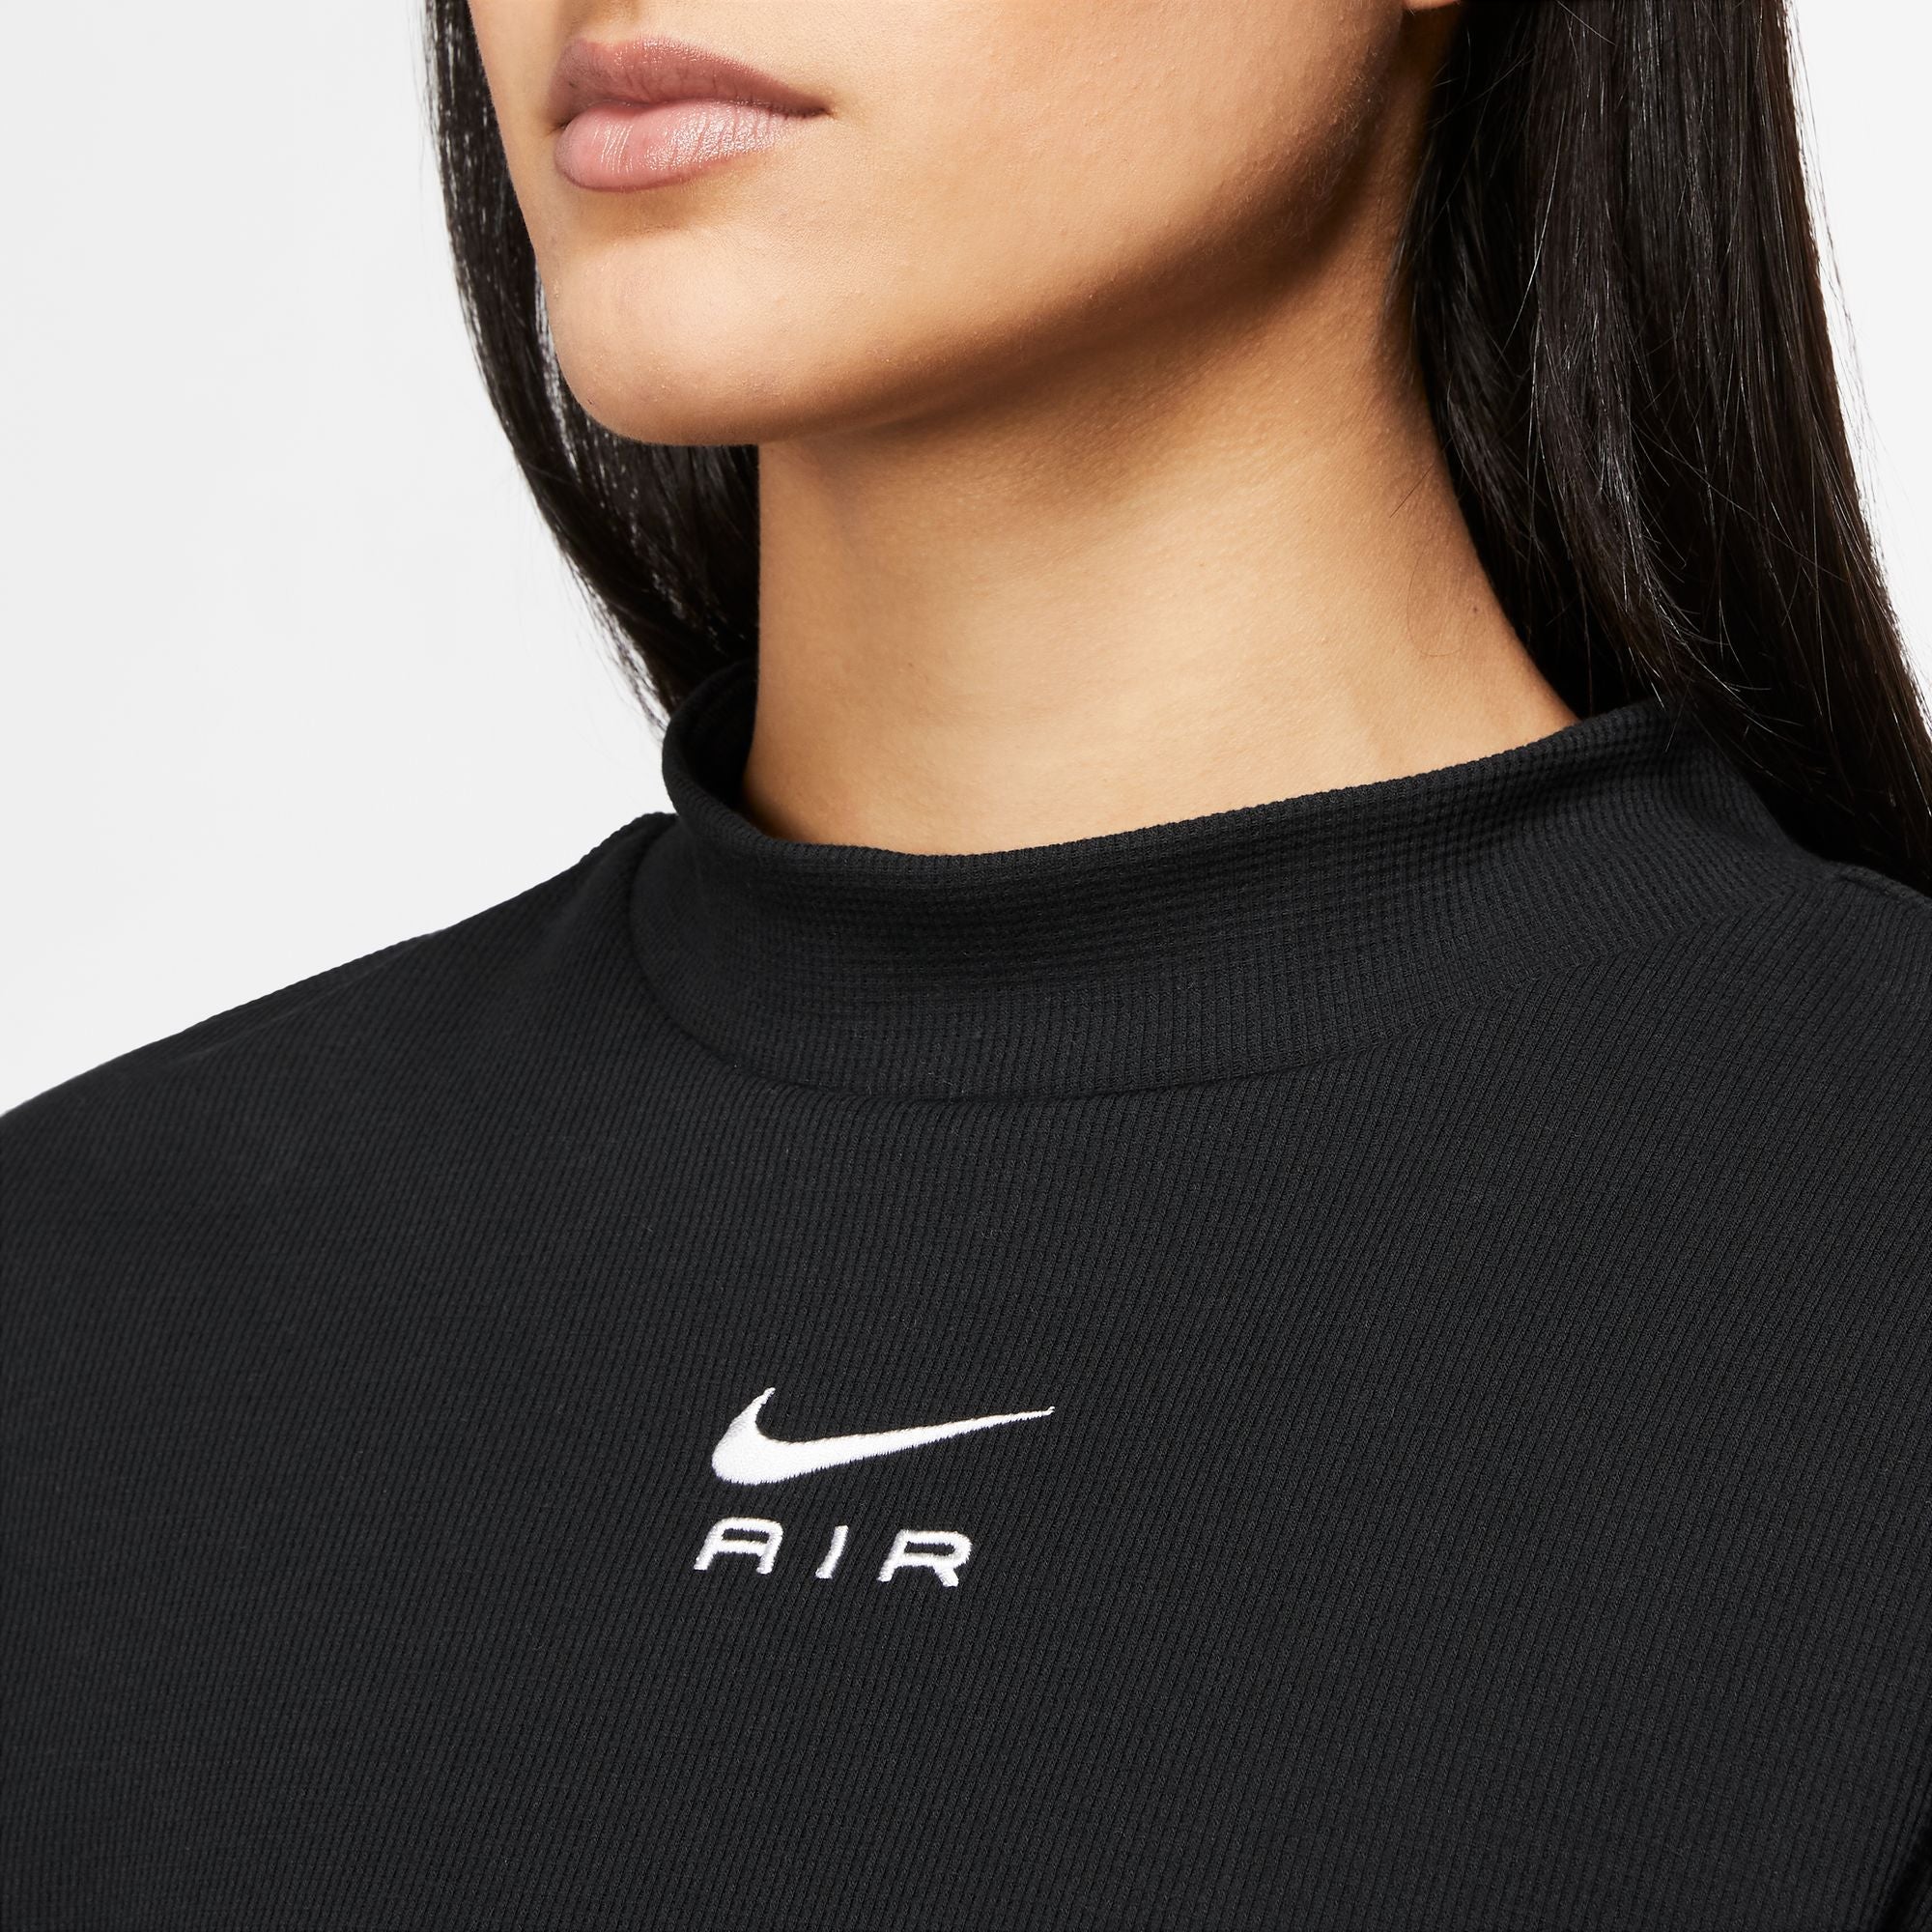 ﻿NIKE AIR ﻿WOMEN'S SHORT-SLEEVE CROPPED TOP ﻿BLACK/WHITE – Park Access